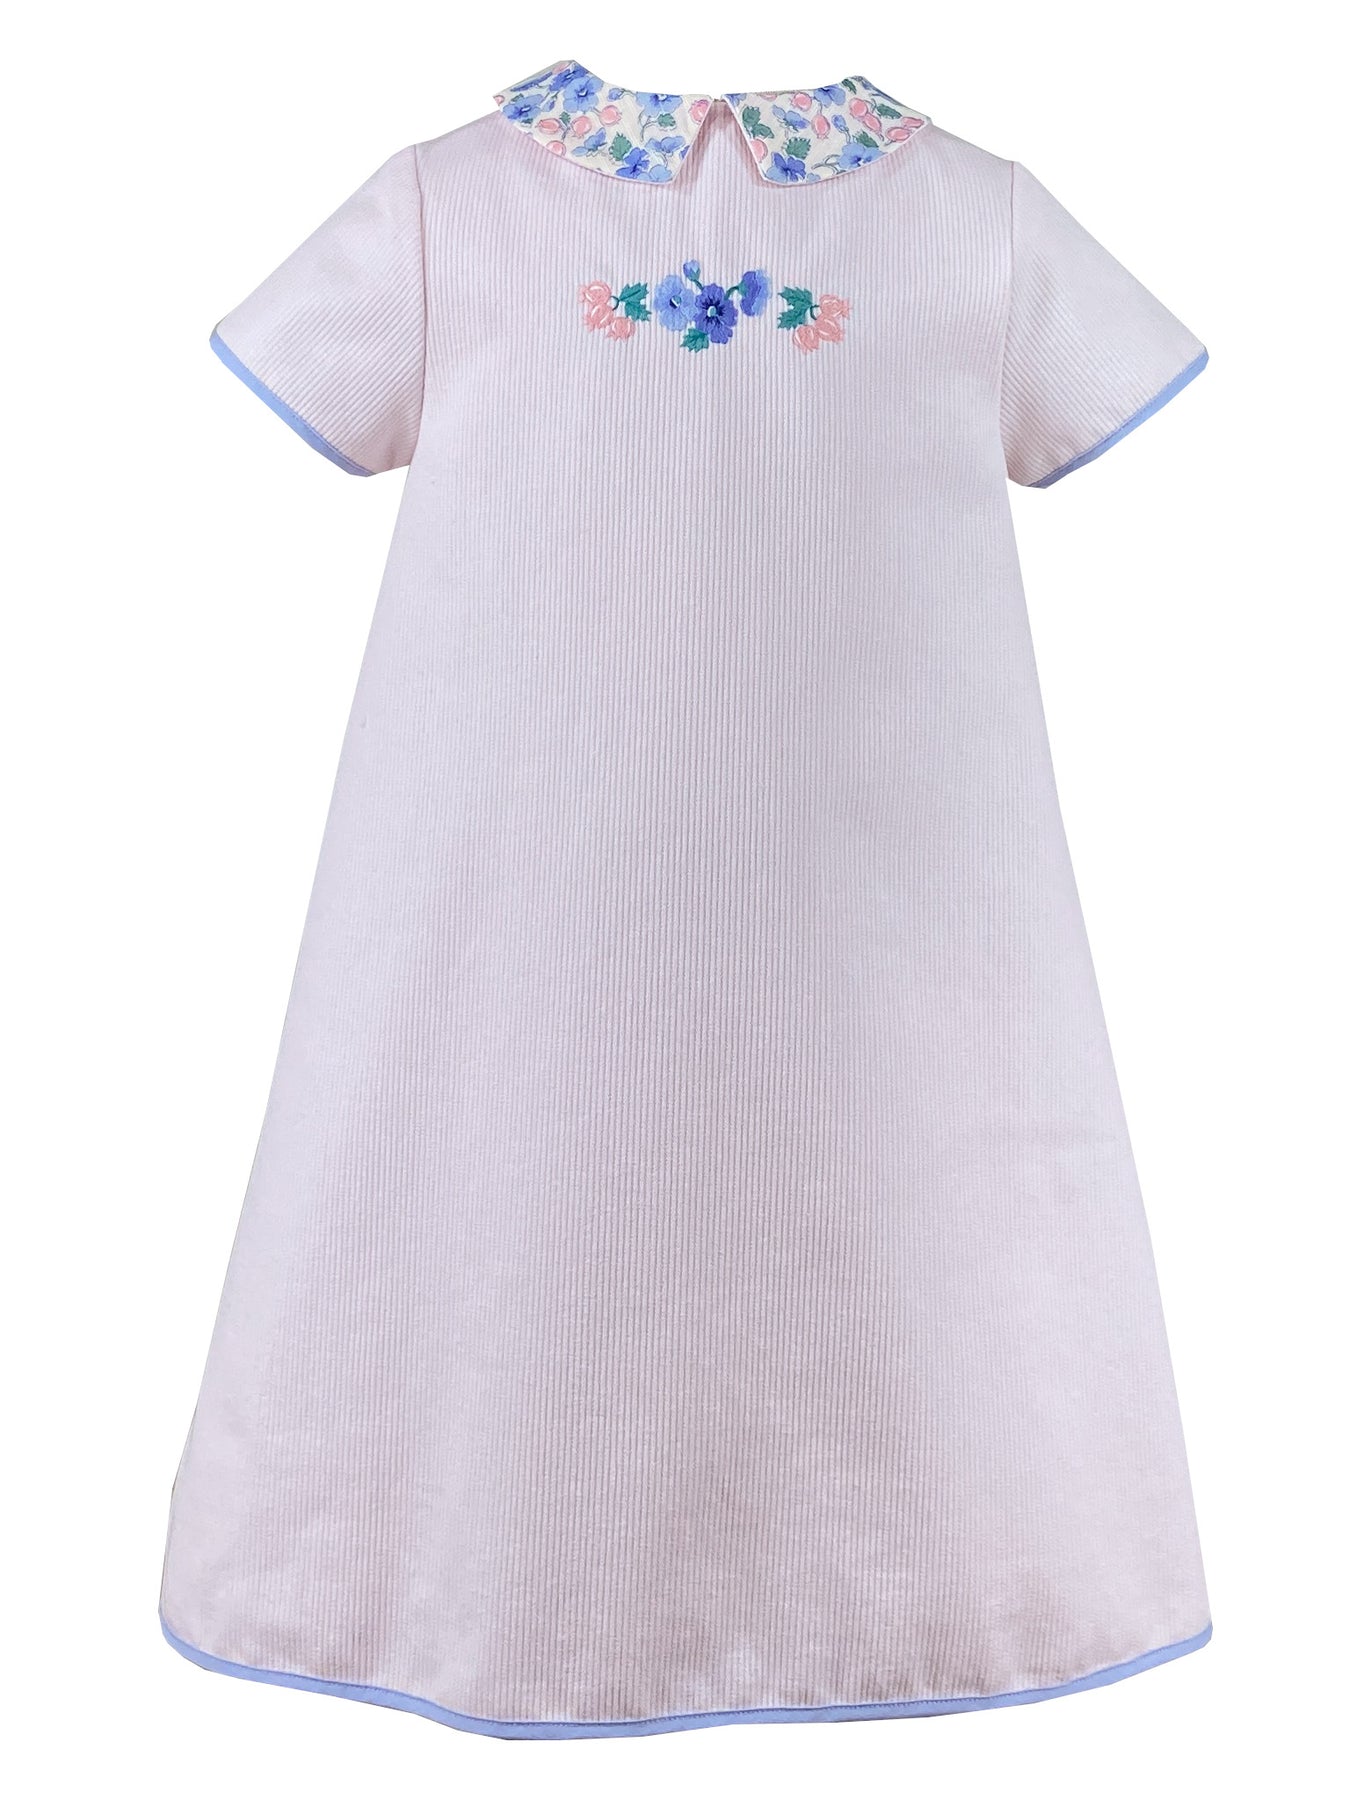 Floral Embroidered Cotton Pique - White/Pink